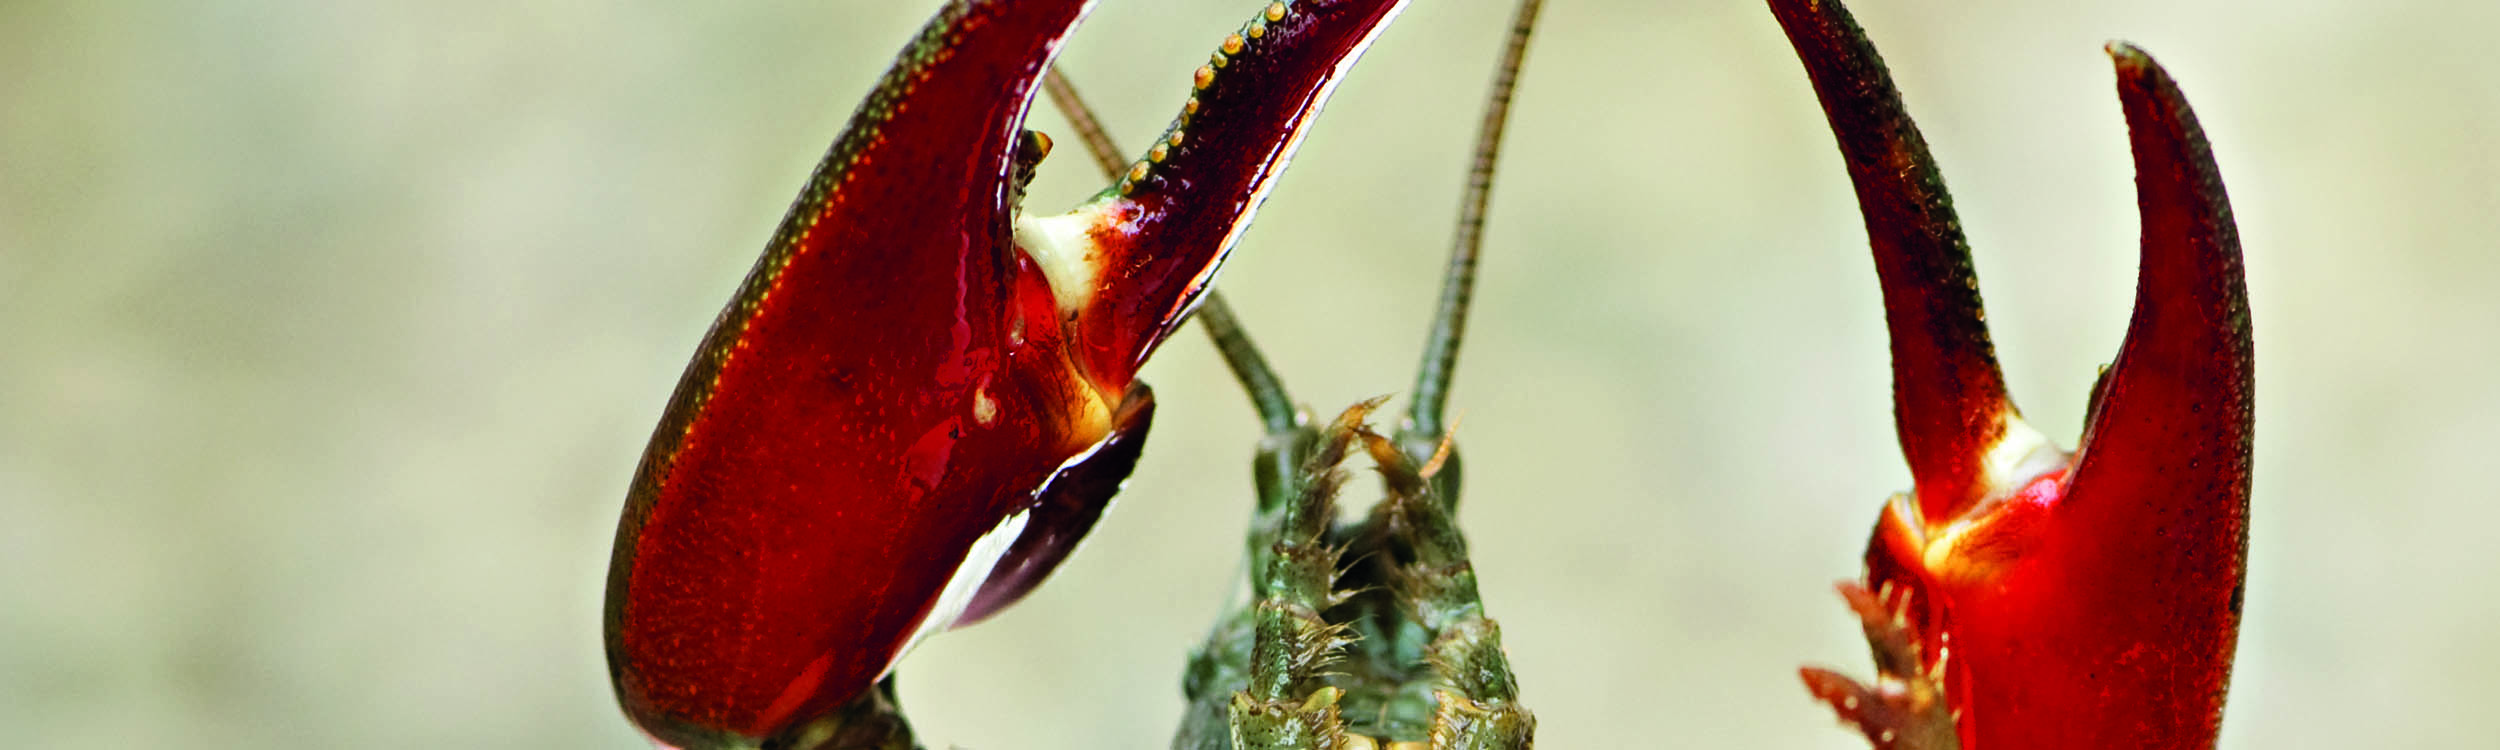 A signal crayfish with bright red claws against a delicate background. - Photo: Astrid Eckert / TUM